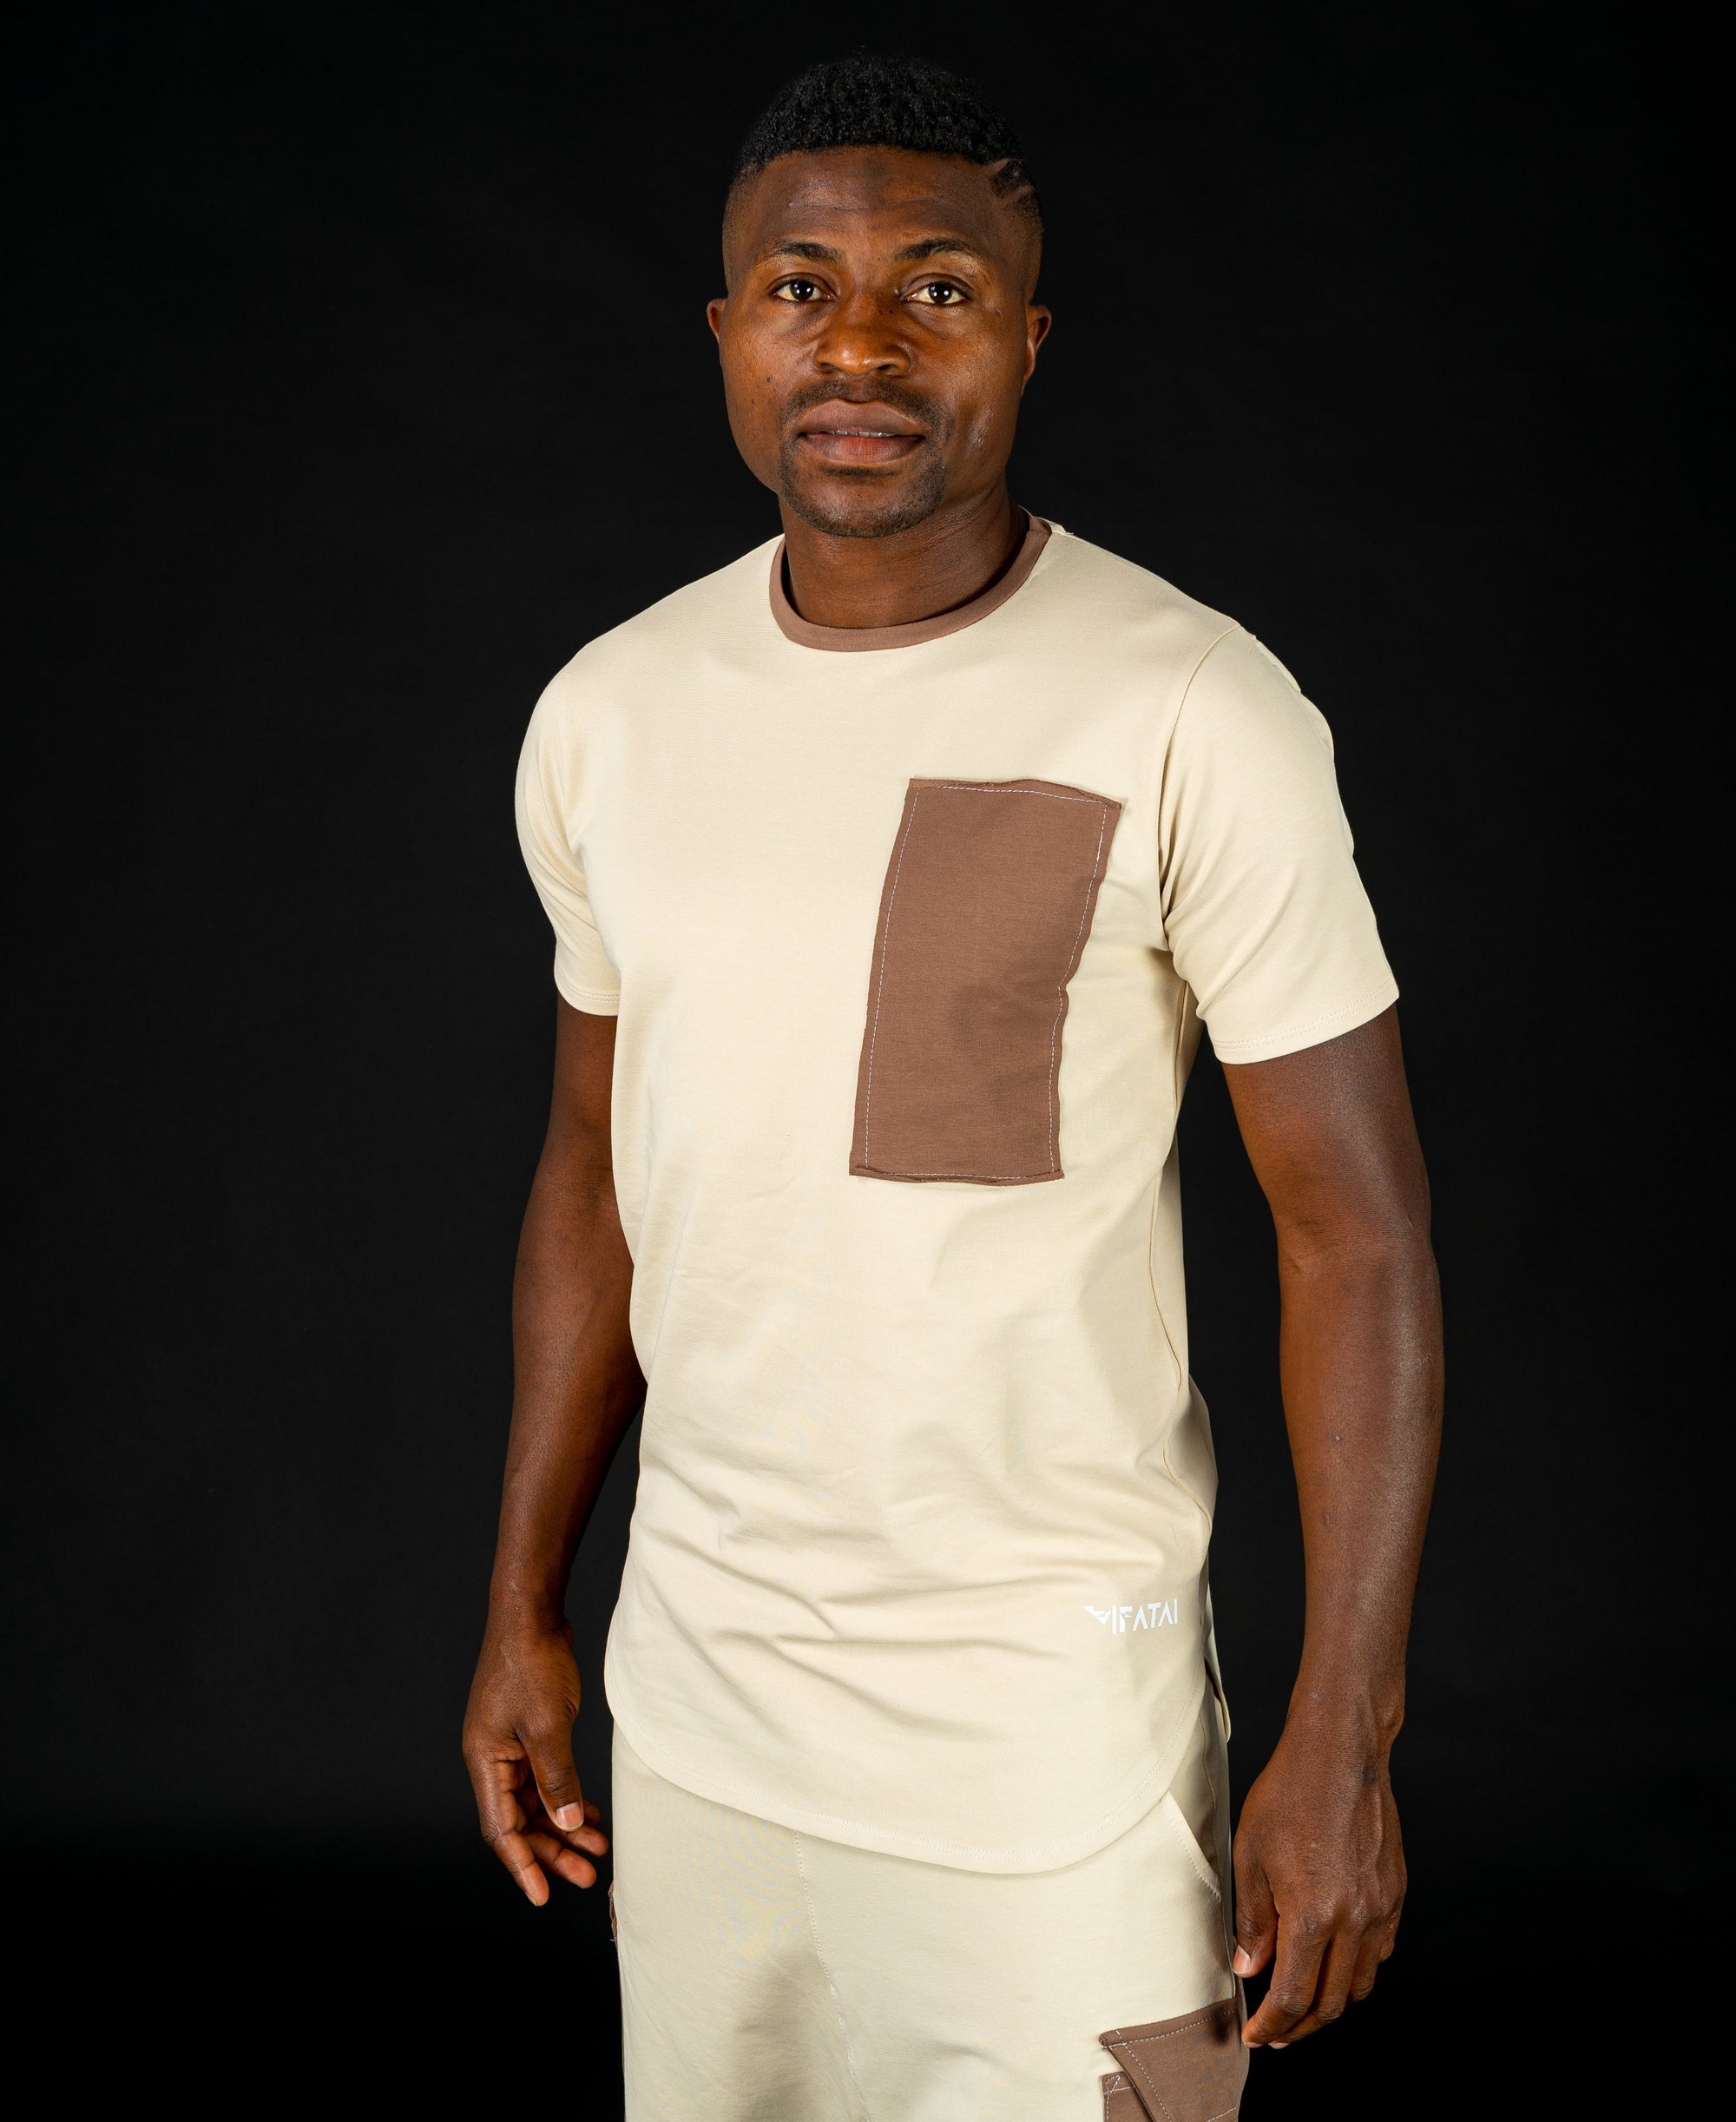 Beige t-shirt with brown design - Fatai Style